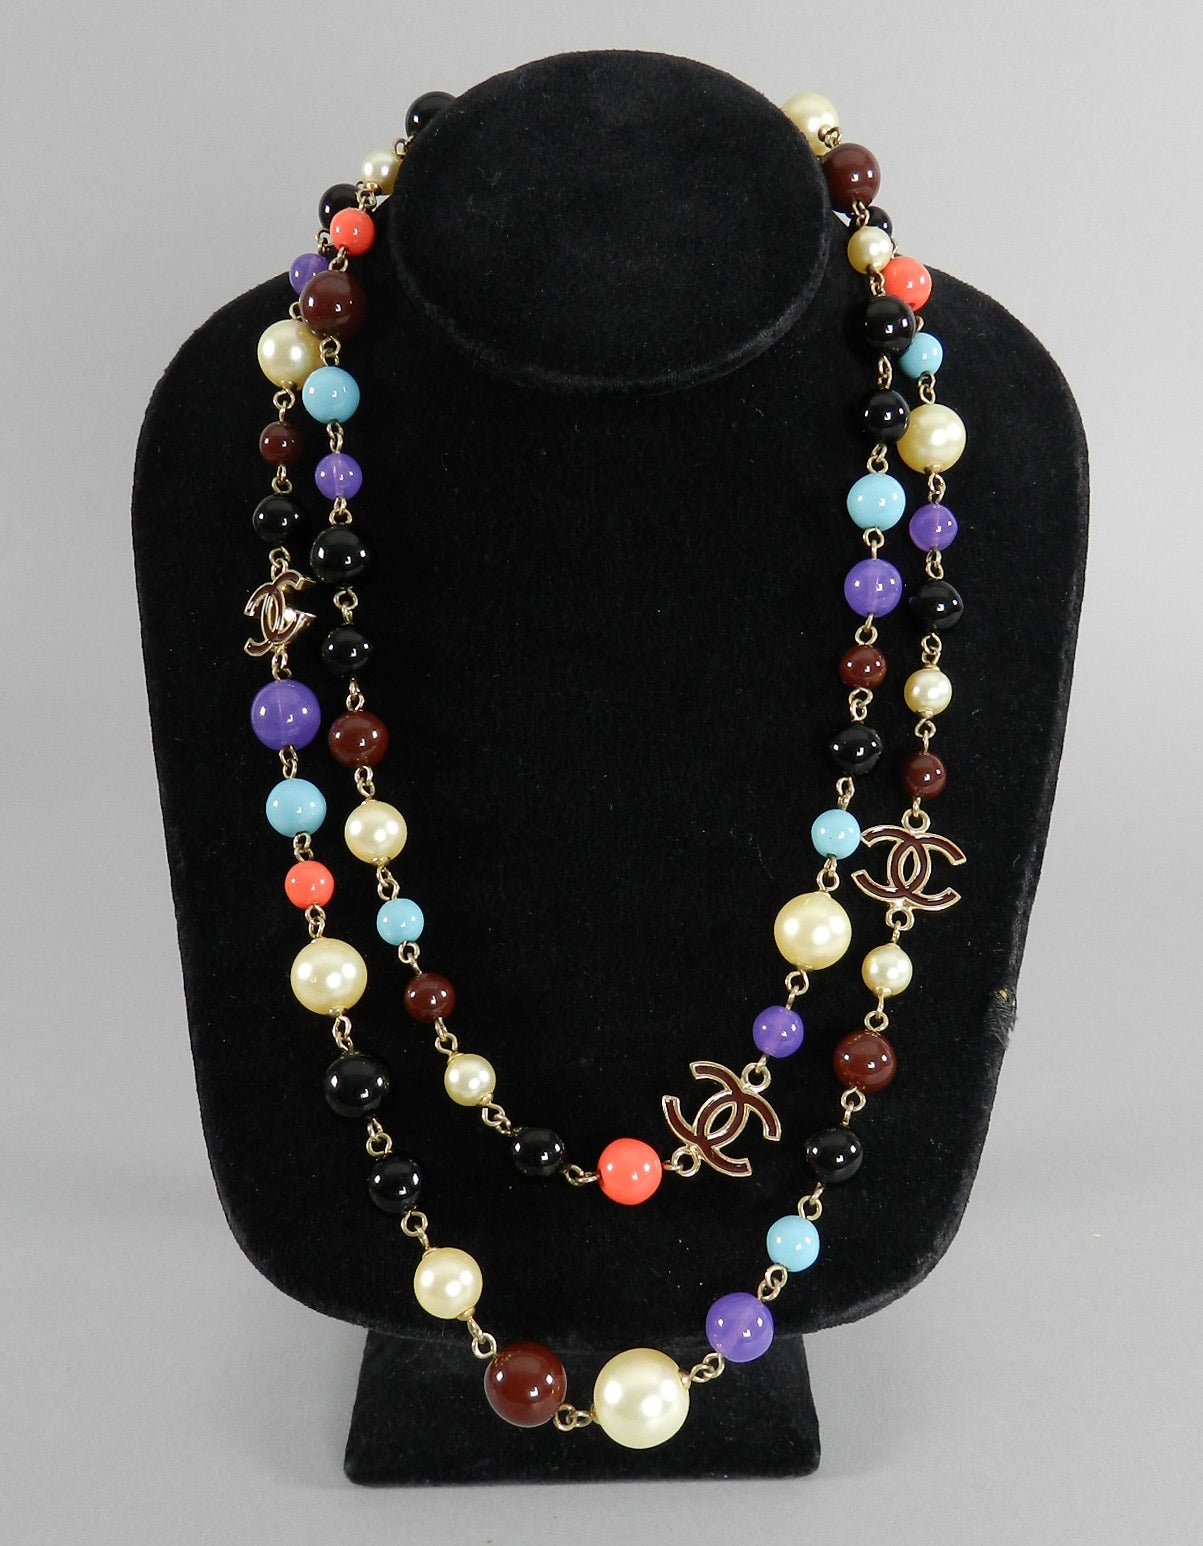 Chanel 2007 Fall runway collection glass beaded necklace. Turquoise, faux pearl, purple, black, coral, and burgundy colored beads.  Goldtone metal. Excellent condition. Measures 20